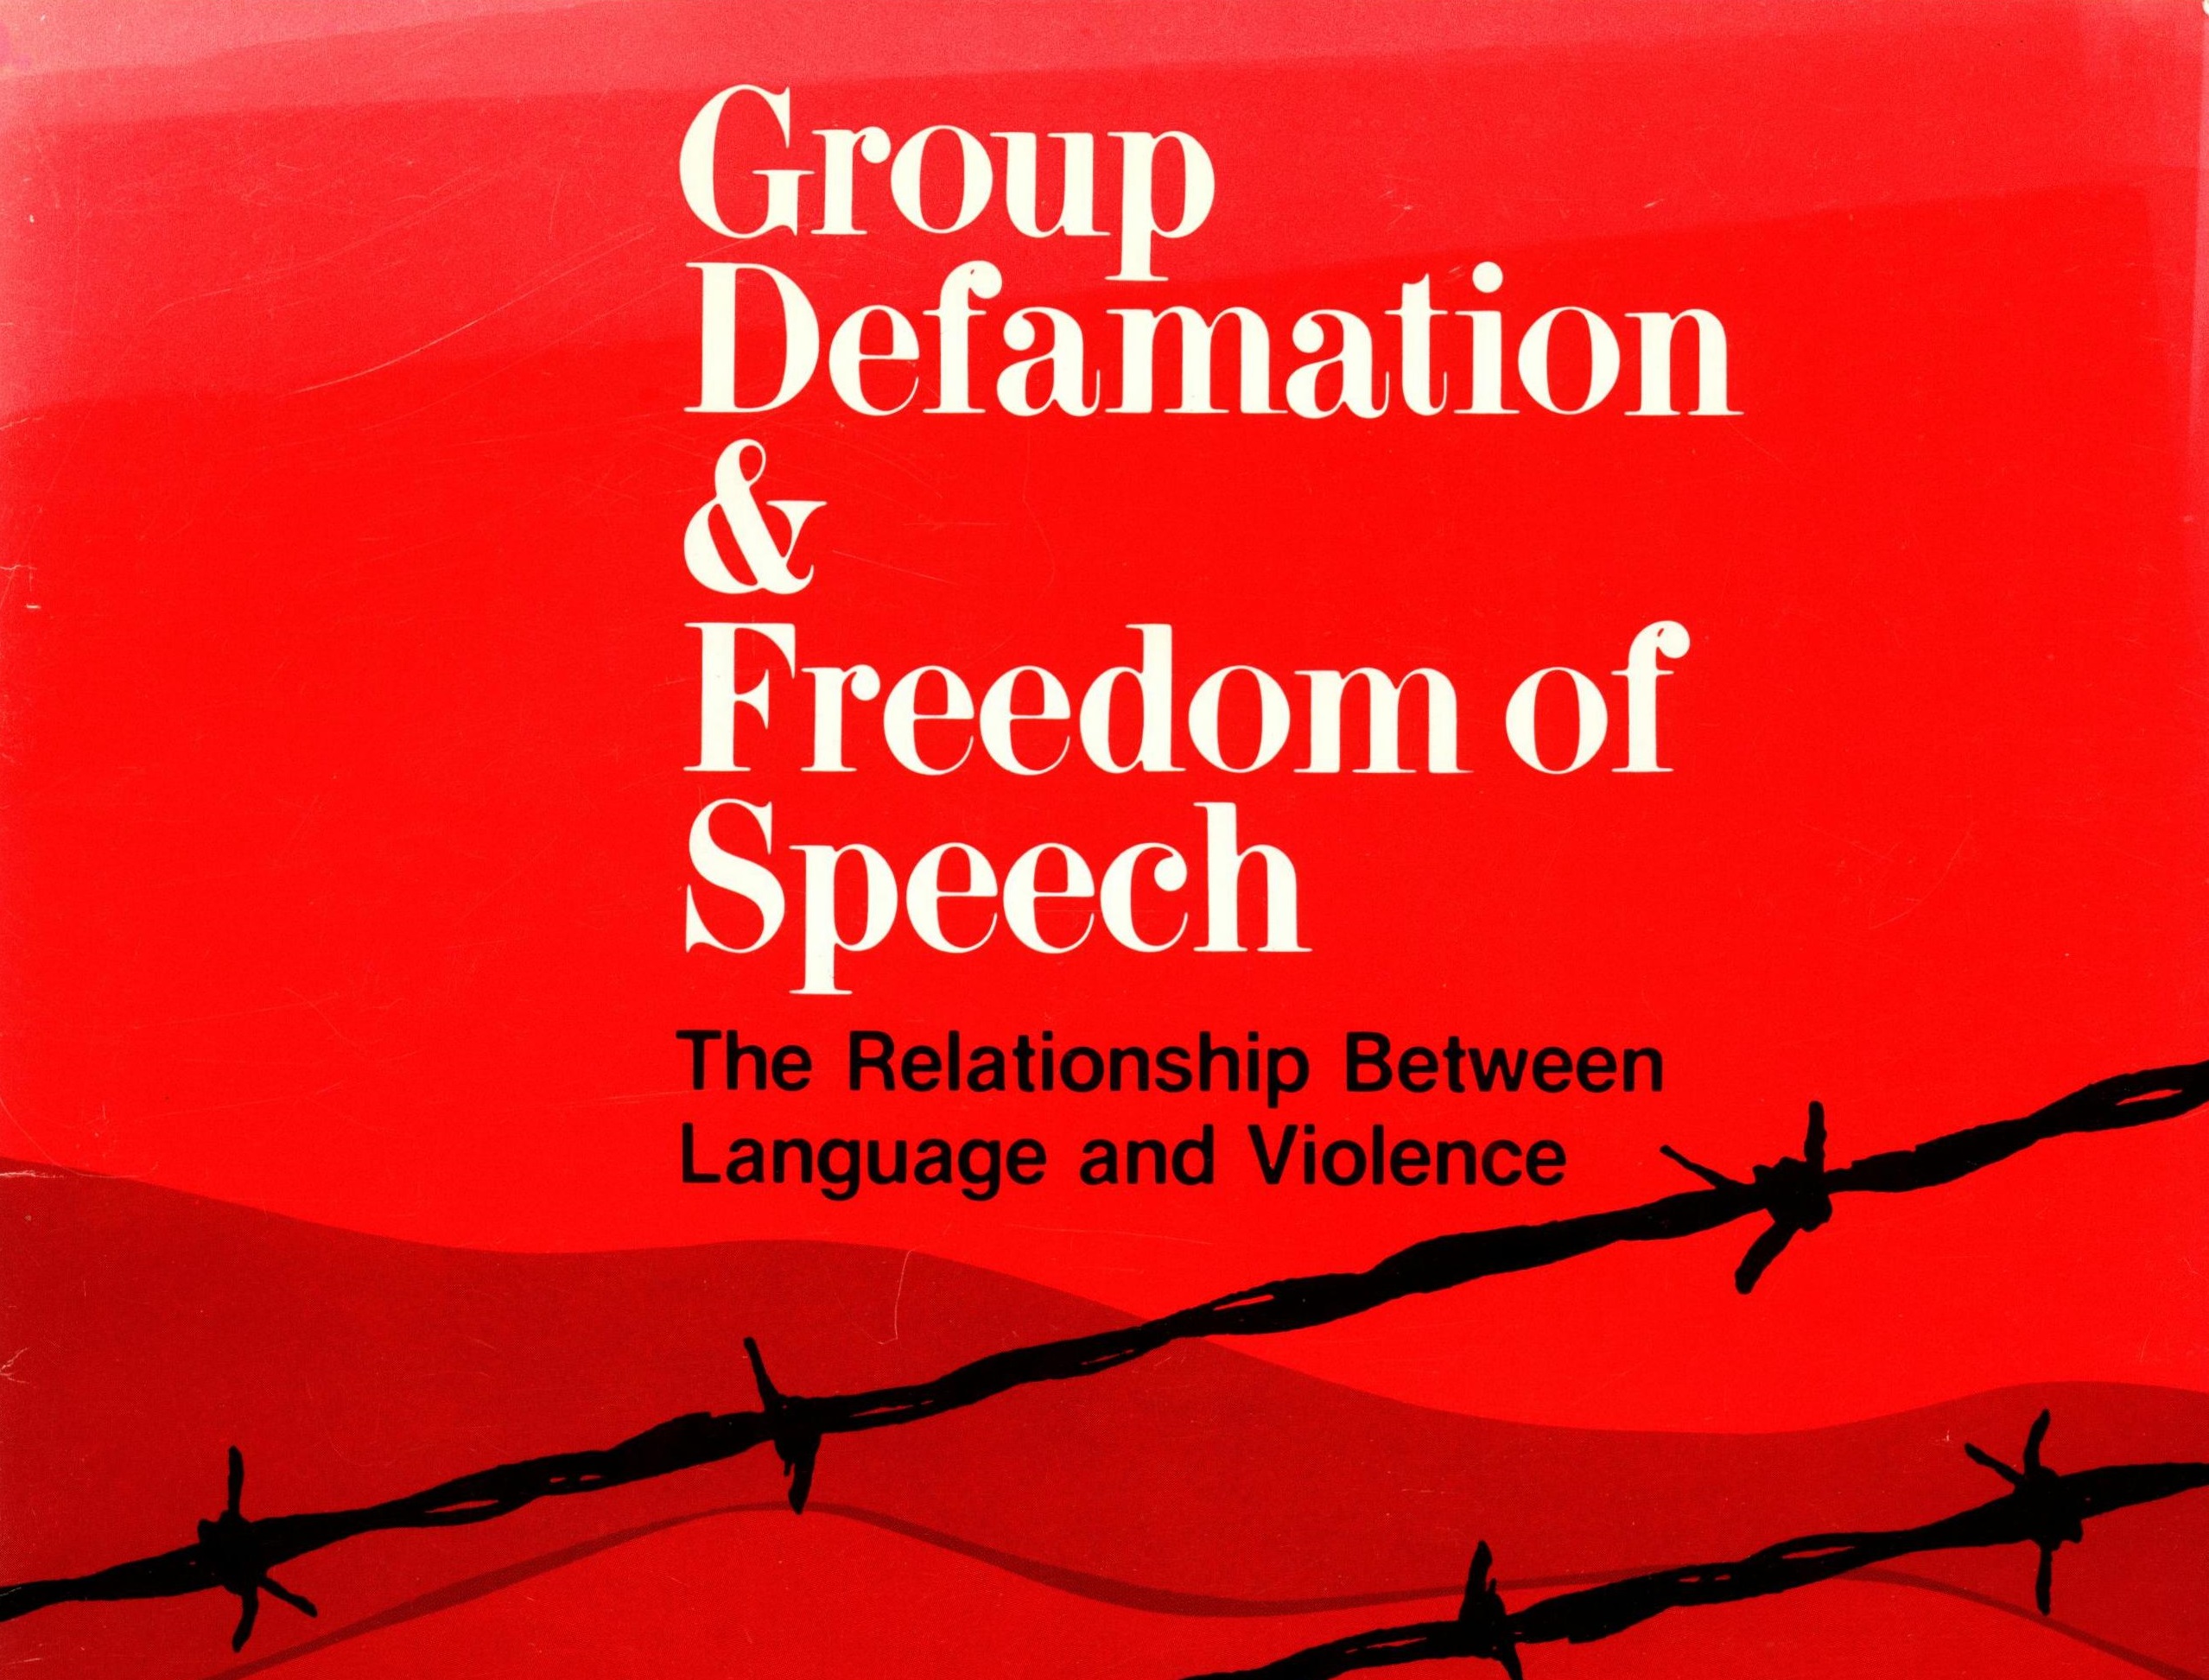 Group Defamation & Freedom of Speech: The Relationship Between Language and Violence (1988)